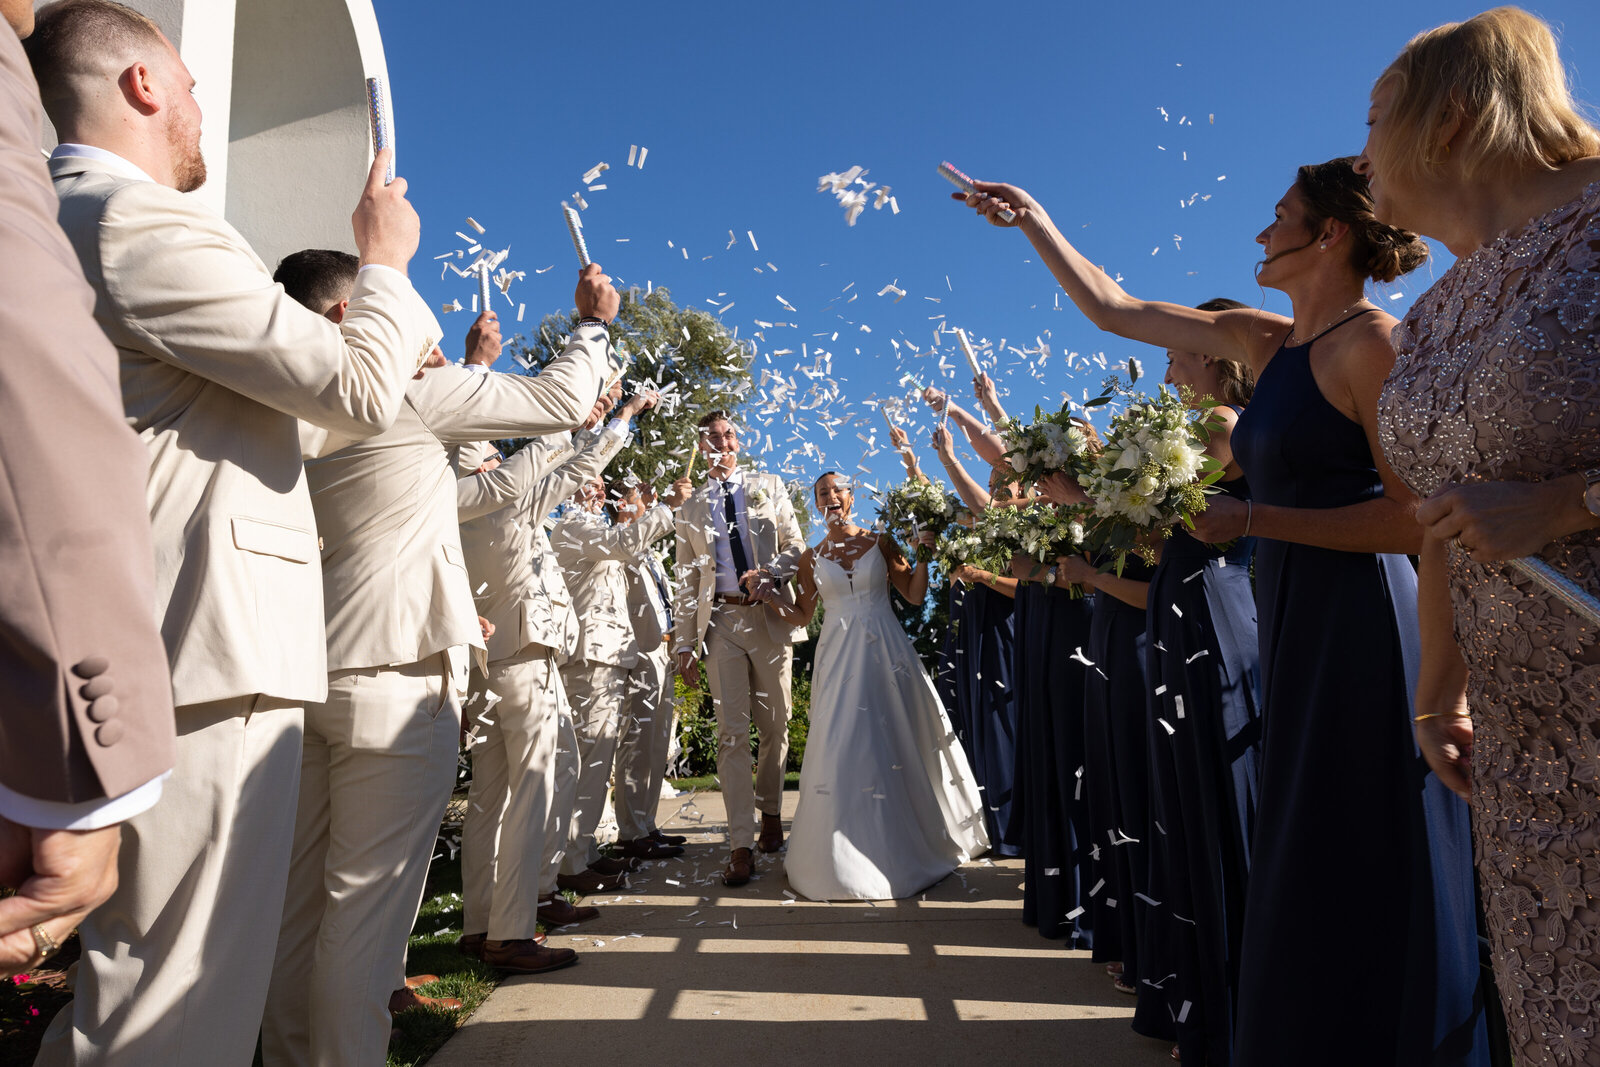 couple is showered with confetti while leaving church